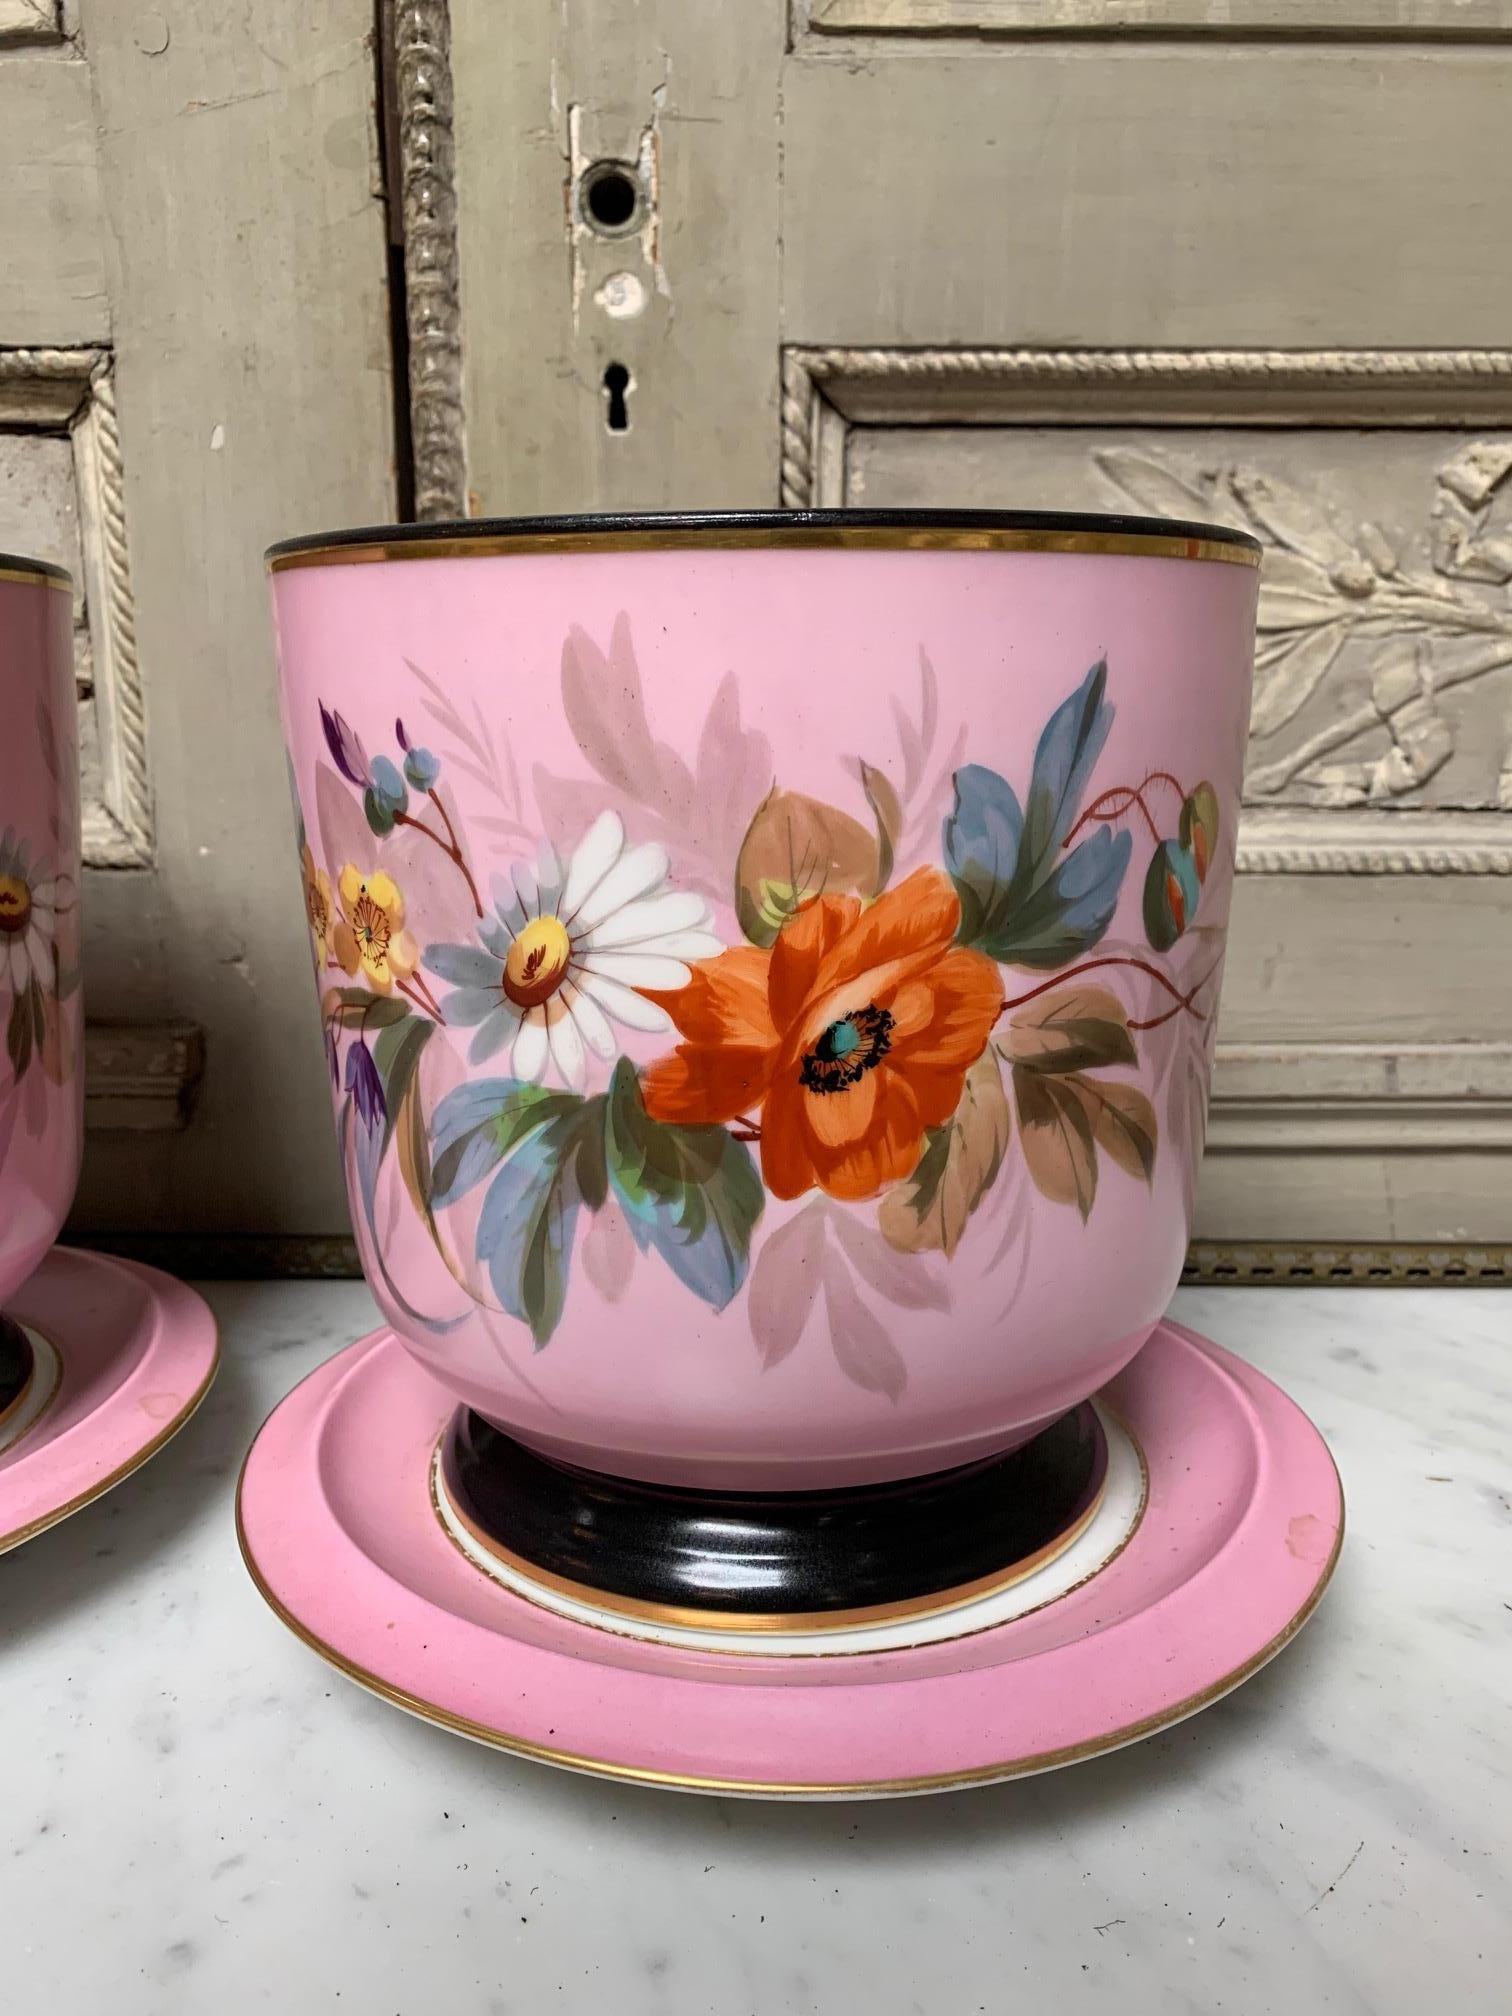 A  beautiful pair of French  porcelain Napoleon III cashpots on stands. The pink and white jardinieres / planters have a black and gold trim on the base and ring of the pots and are wonderfully decorated with floral and foliage among them poppies